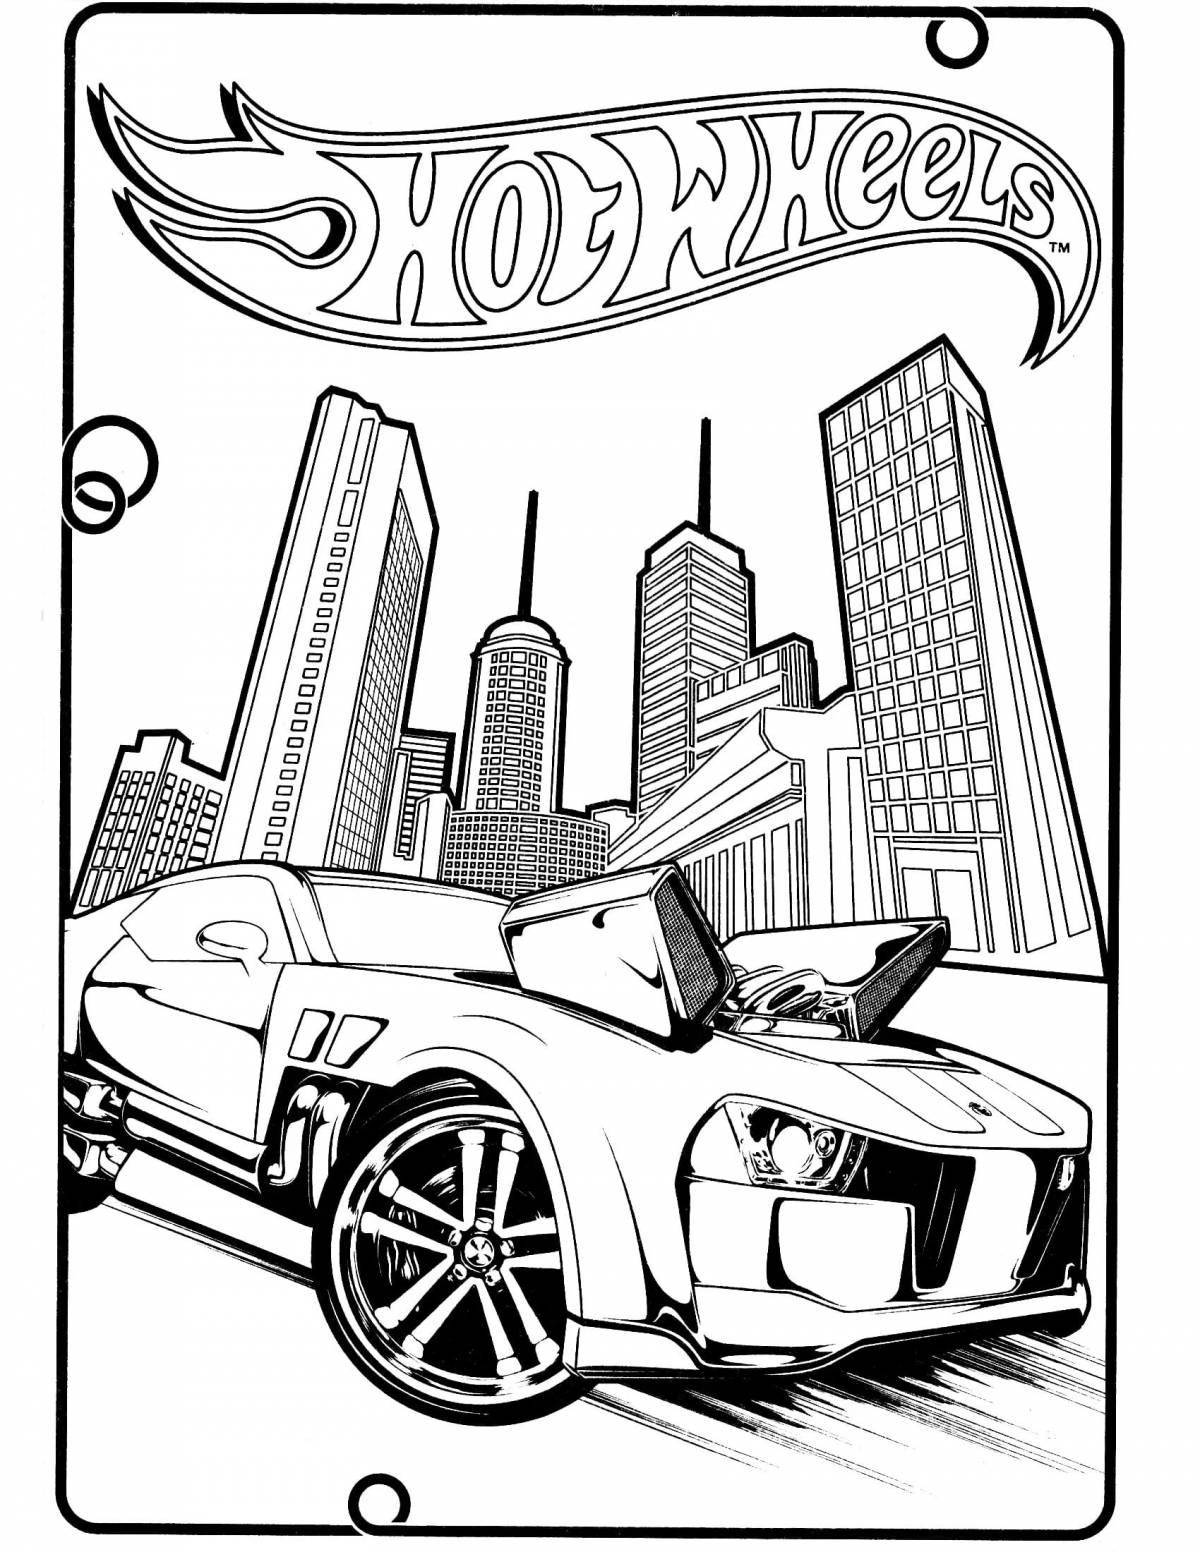 Outstanding hot wheels coloring book for boys